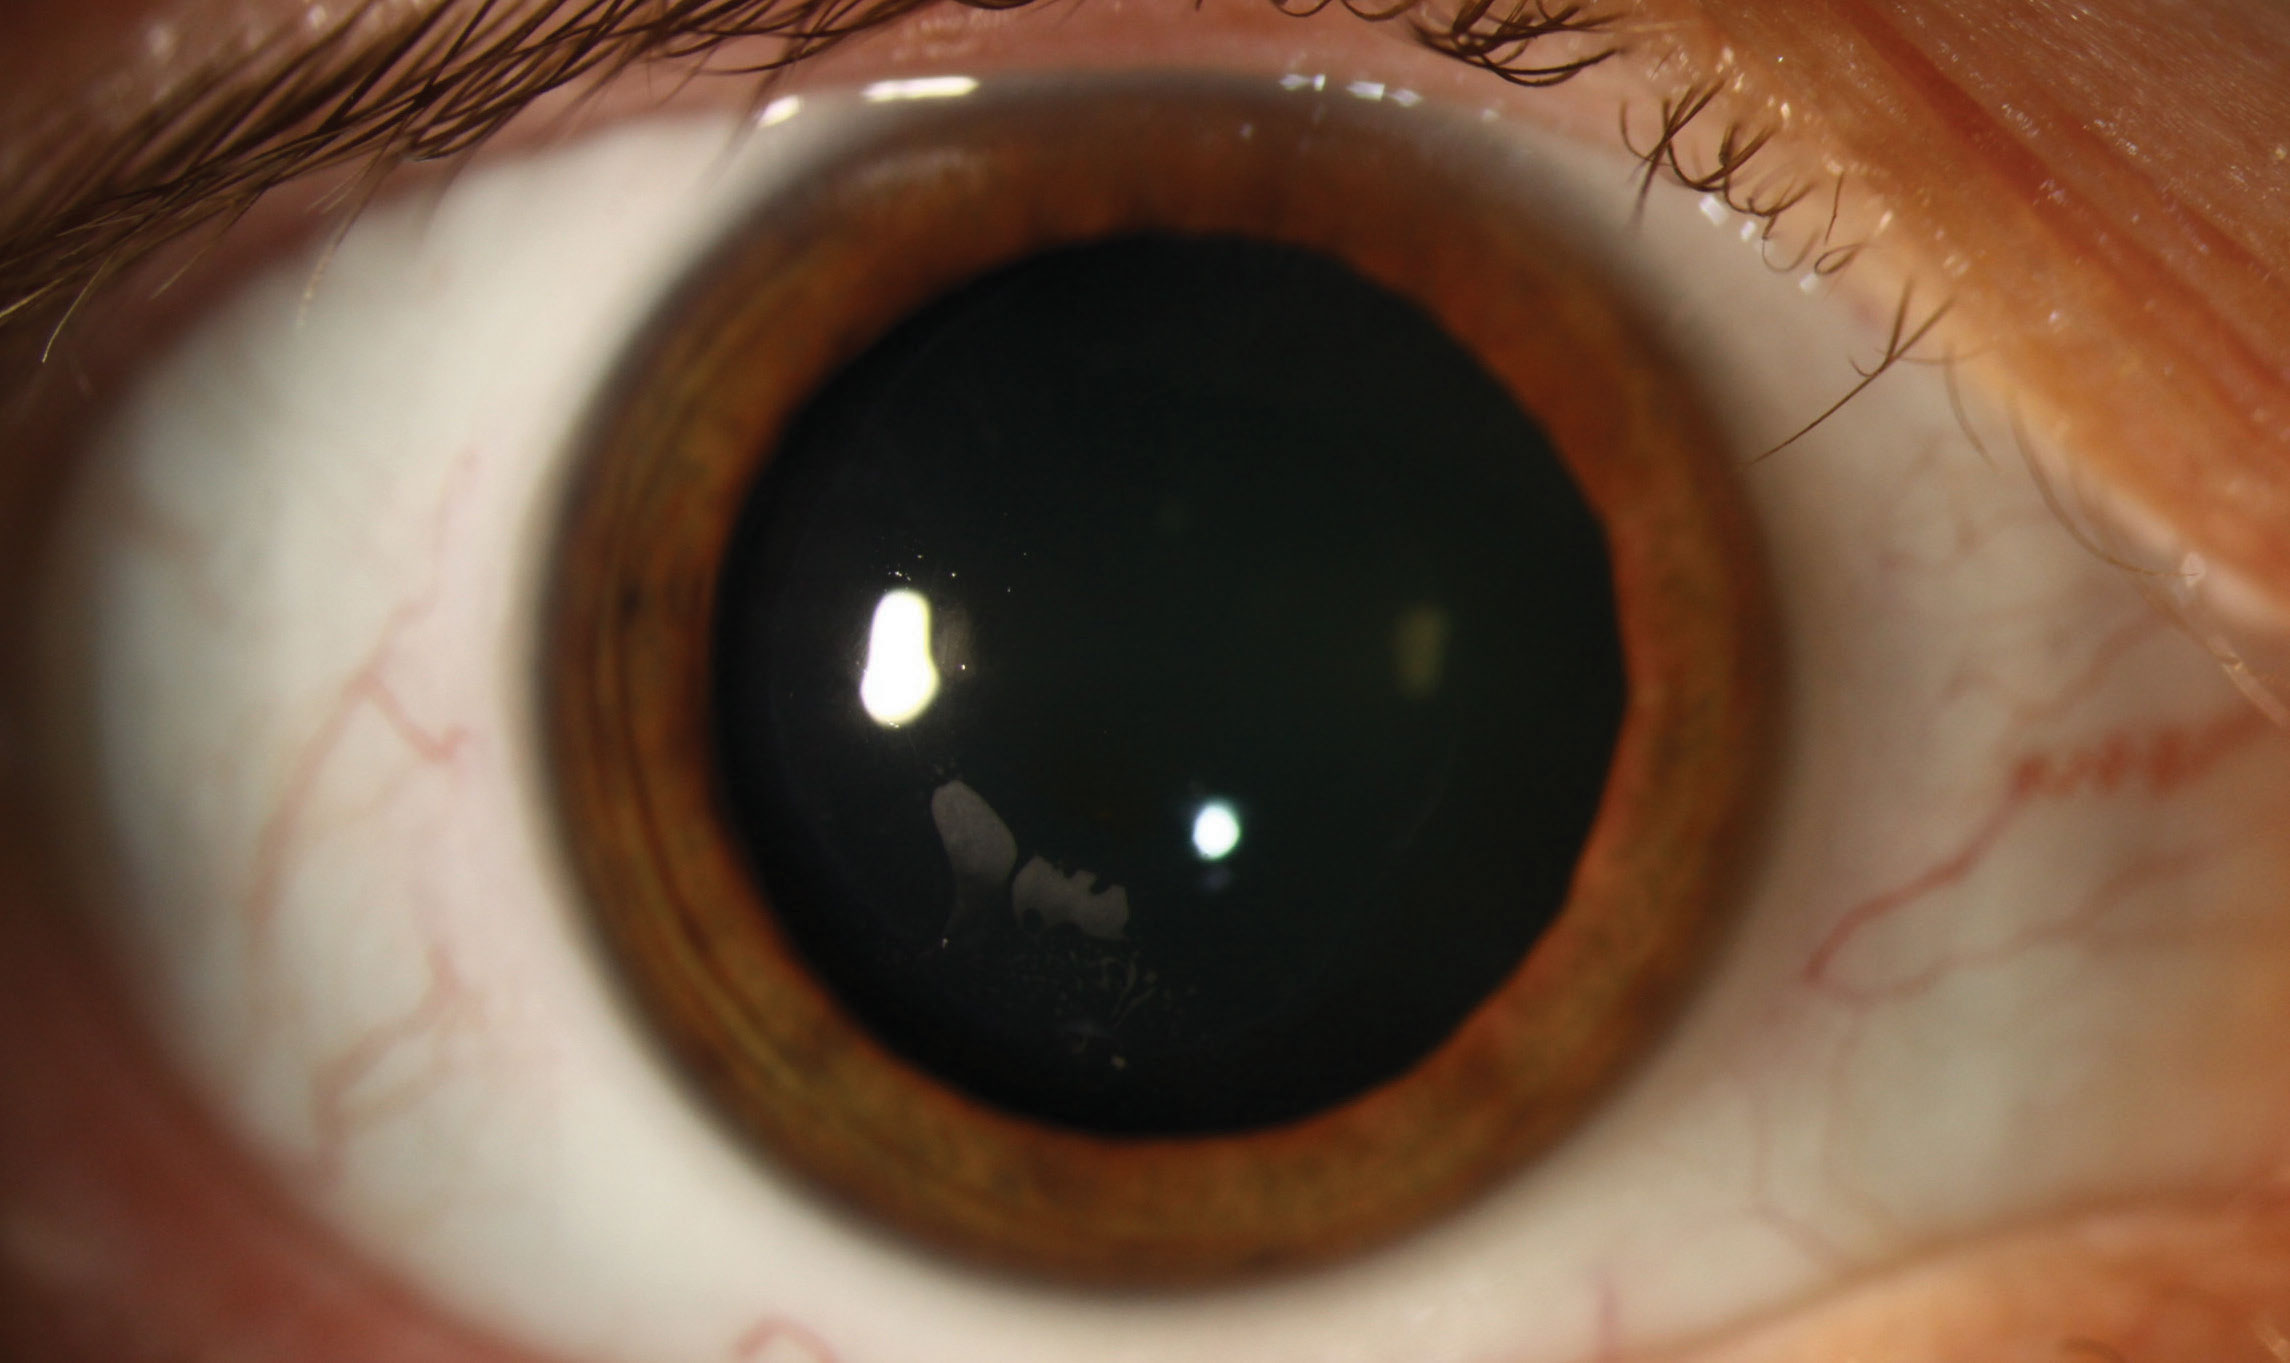 This patient has post-LASIK epithelial ingrowth, a rare complication characterized by the ingrowth of corneal epithelium at the interface between the flap and stromal bed.